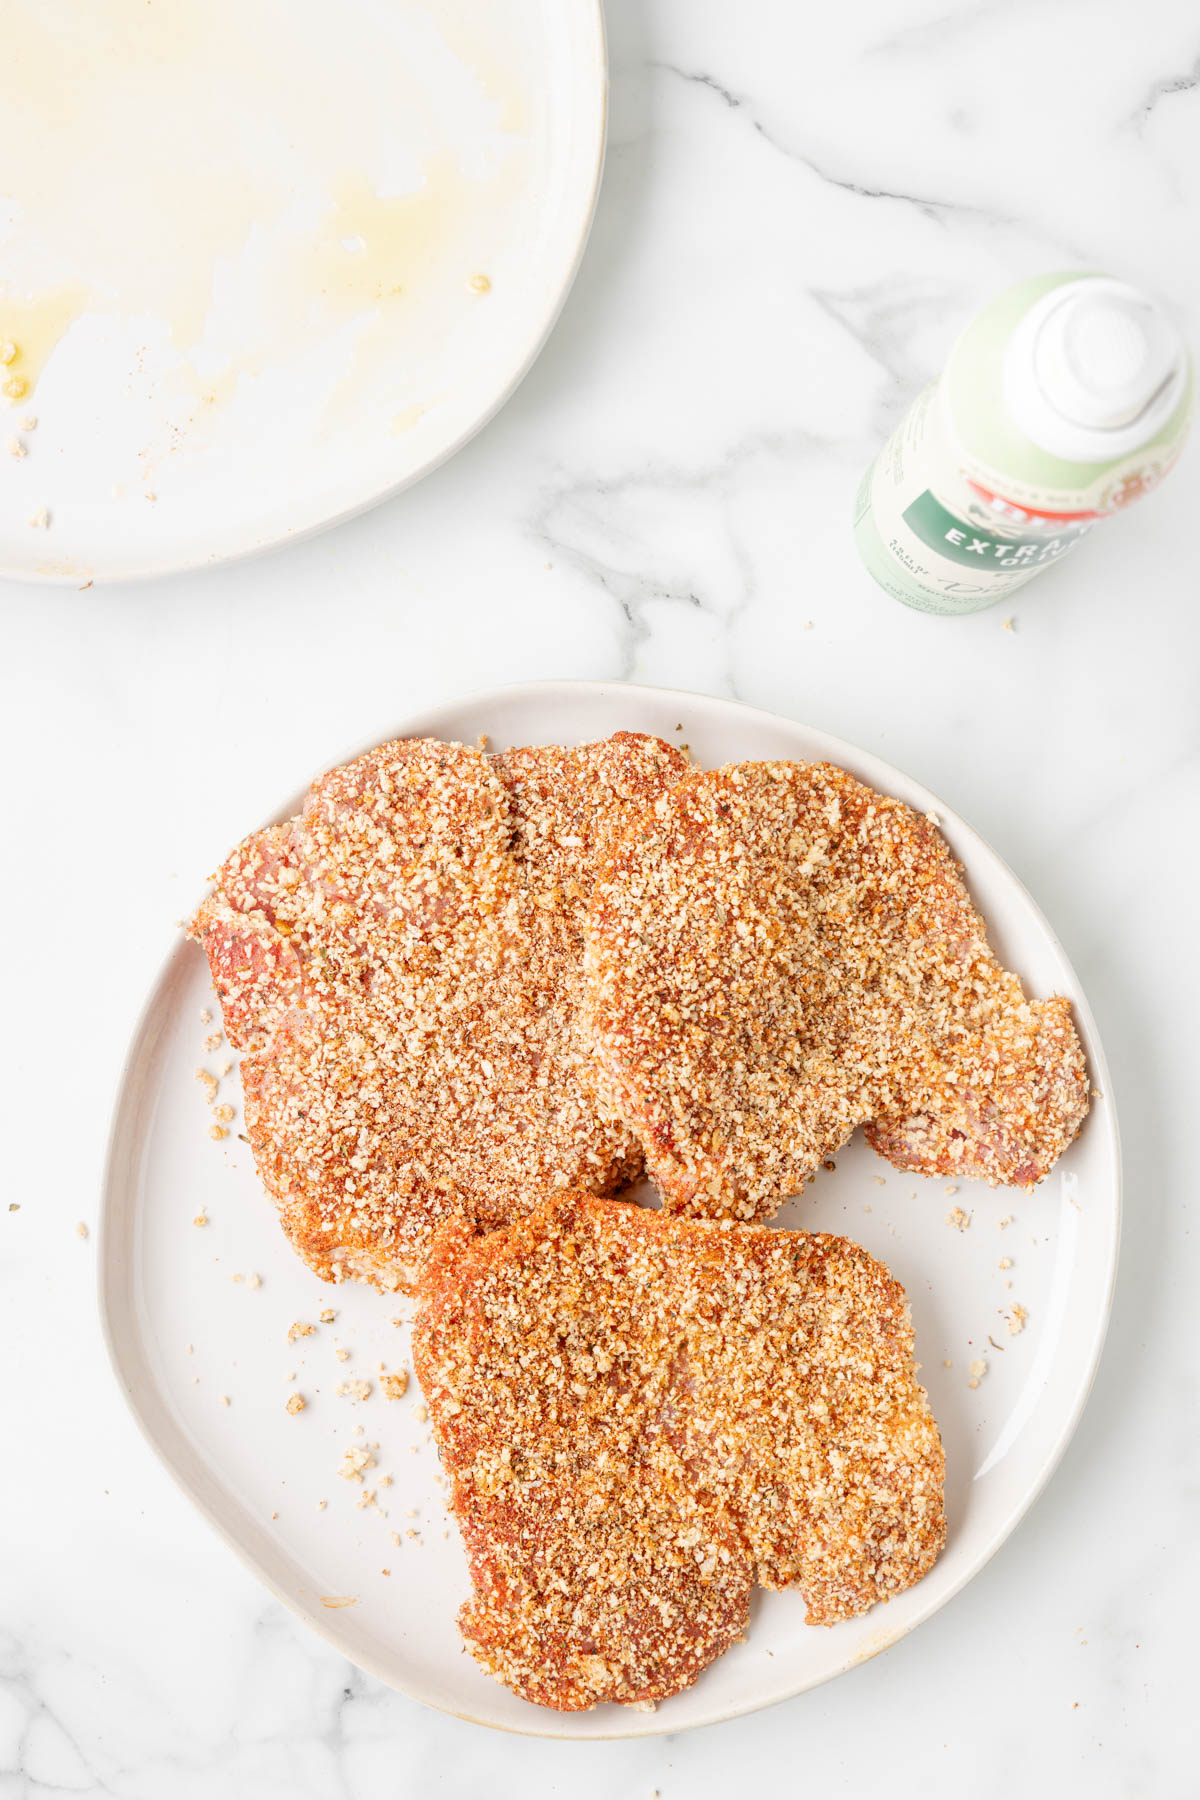 Uncooked pork chops are shown after being coated in a breadcrumb and spice mixture, ready for cooking. 